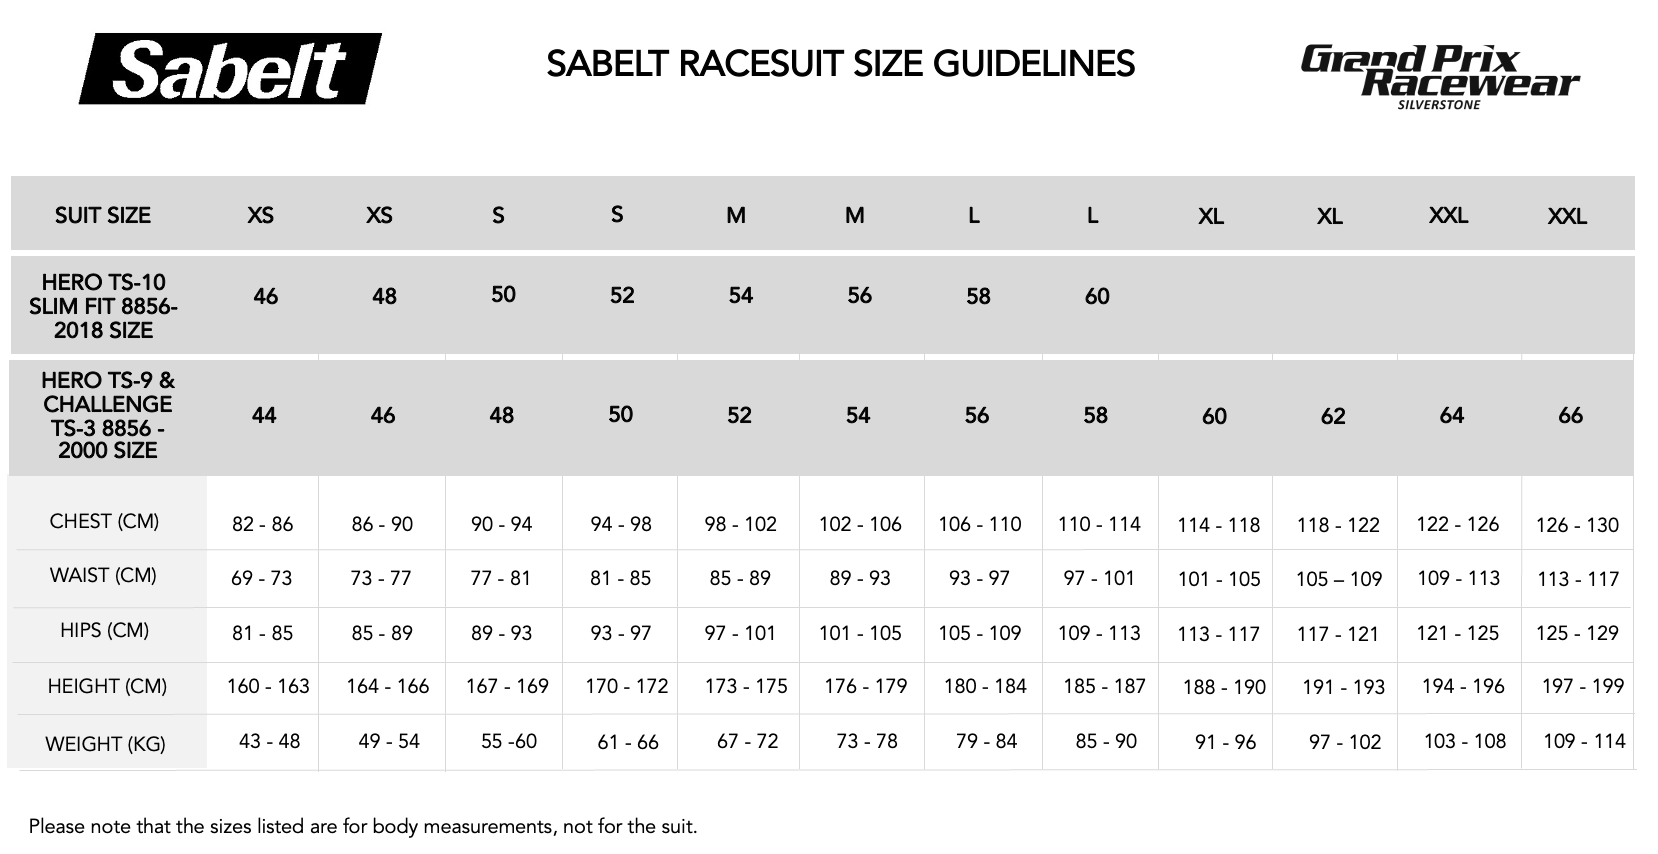 Size Guide for Sabelt Race Suits available from www.gprdirect.com